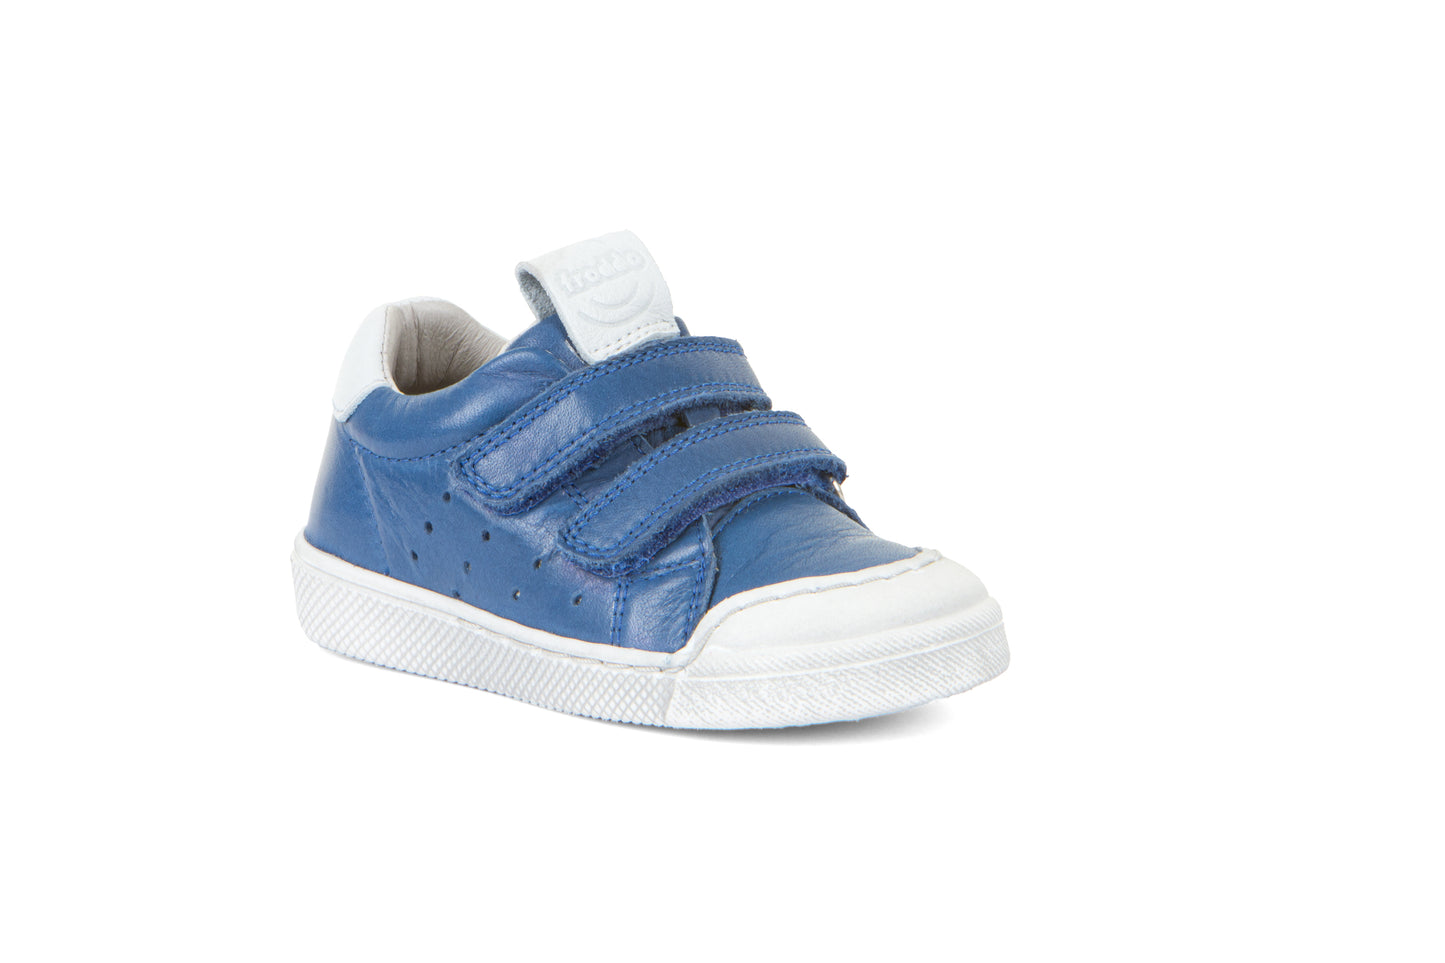 A boys casual shoe by Froddo, style G2130290-1 Rosario, in blue with white trim, double velcro fastening. Angled view.